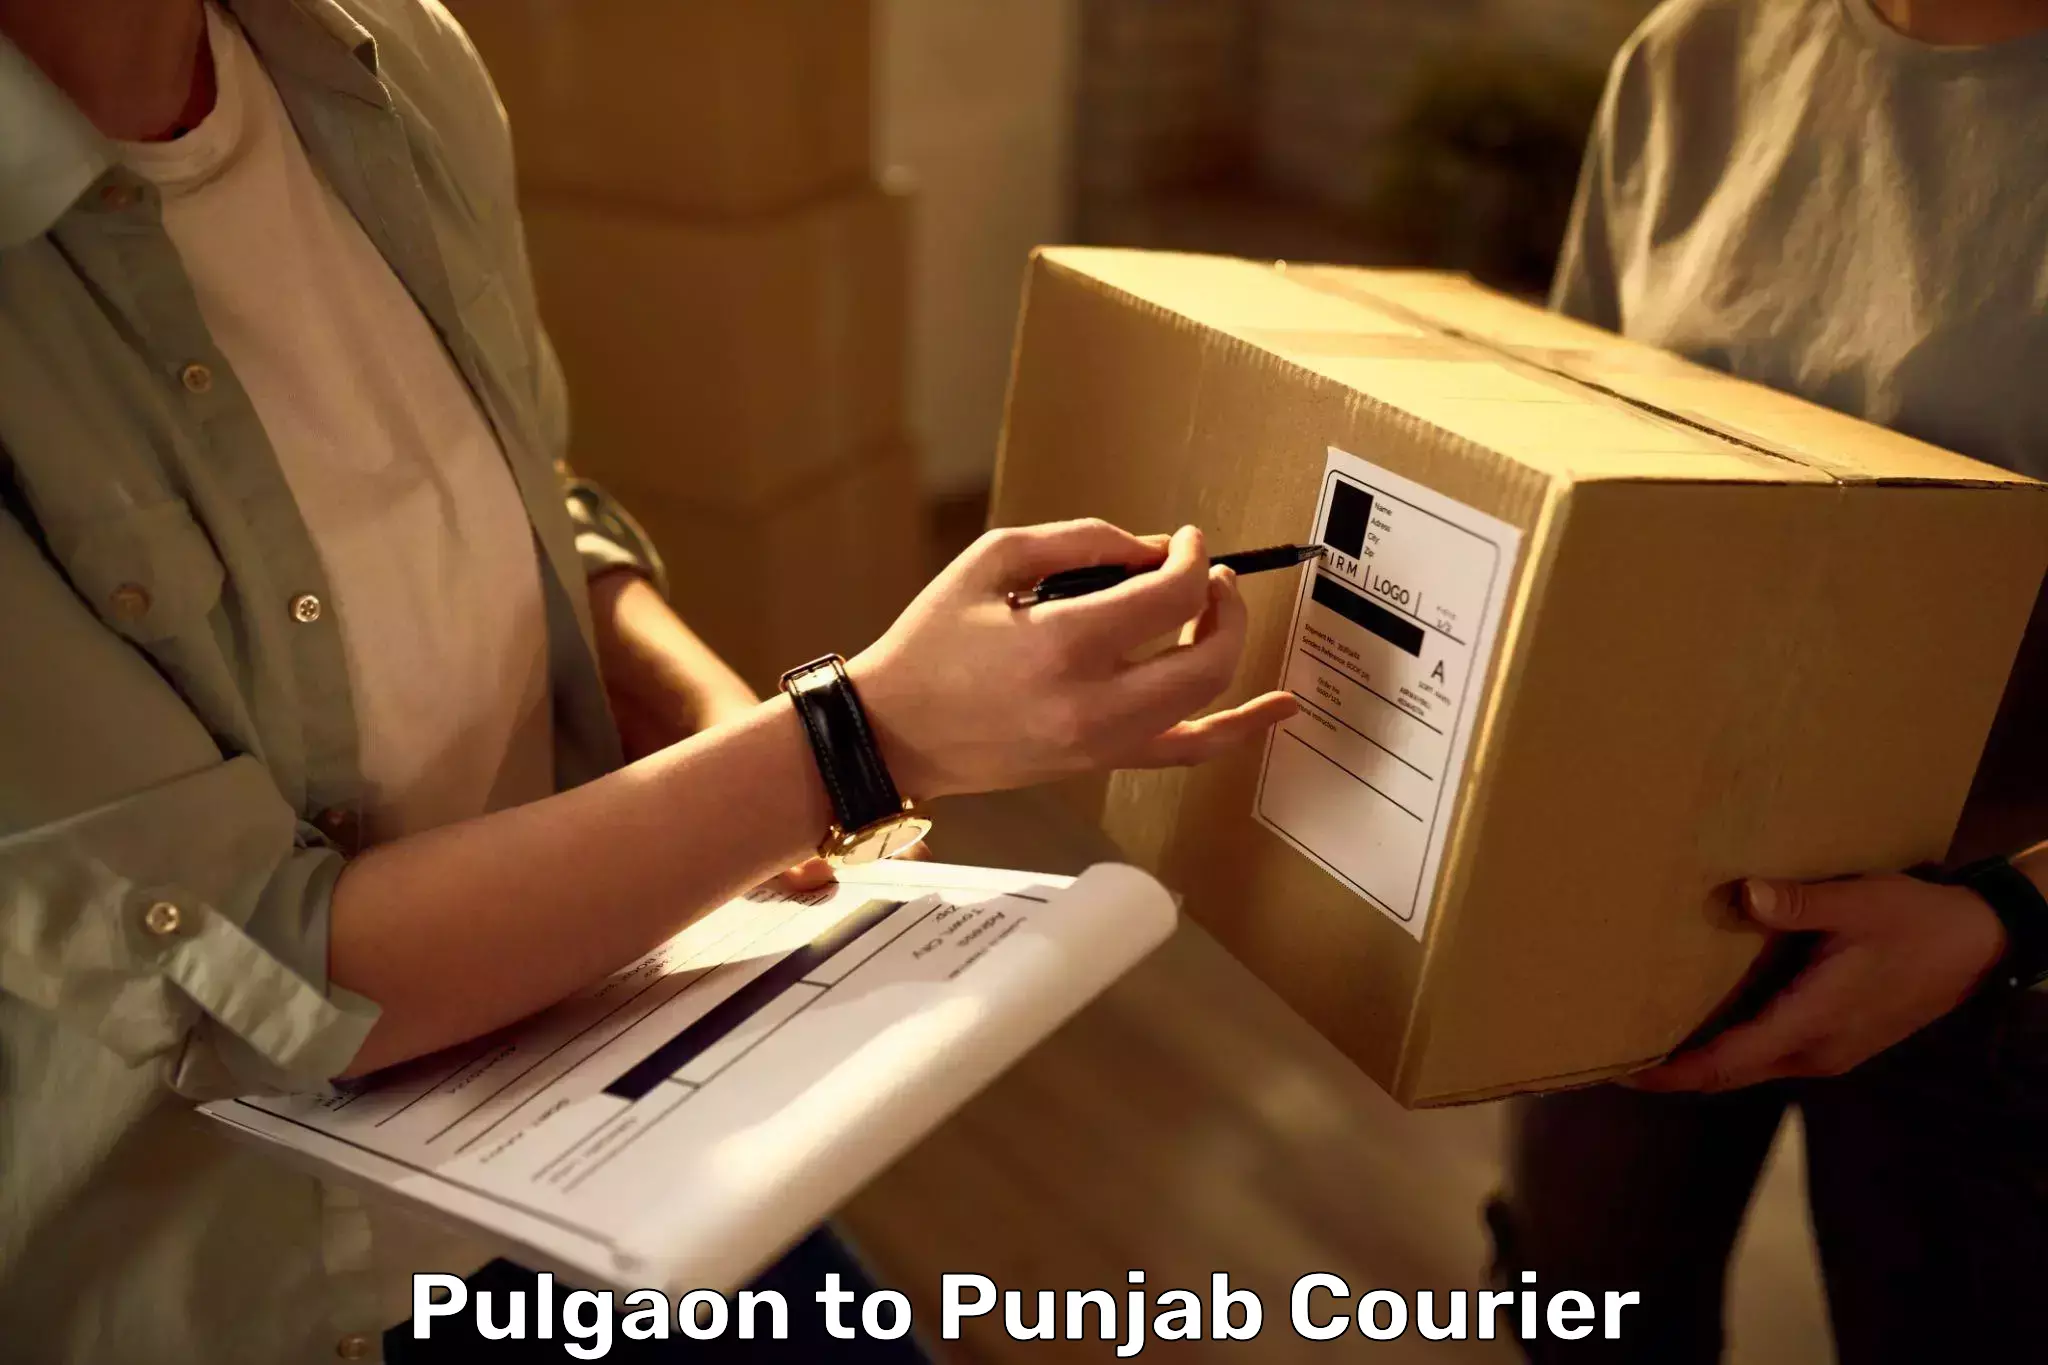 Luggage transport solutions Pulgaon to Mohali